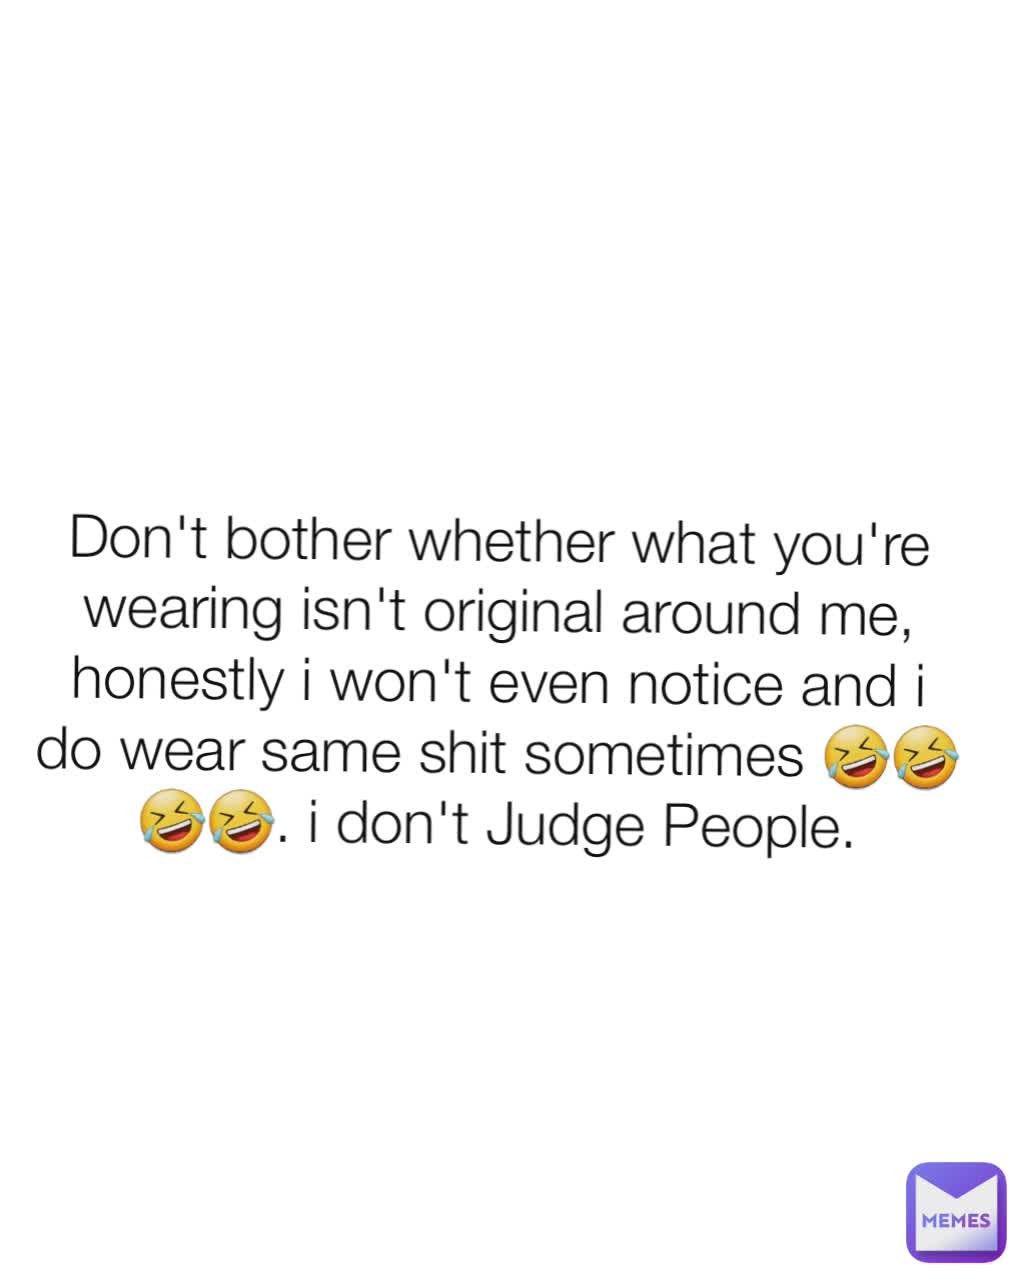 Don't bother whether what you're wearing isn't original around me, honestly i won't even notice and i do wear same shit sometimes 🤣🤣🤣🤣. i don't Judge People.